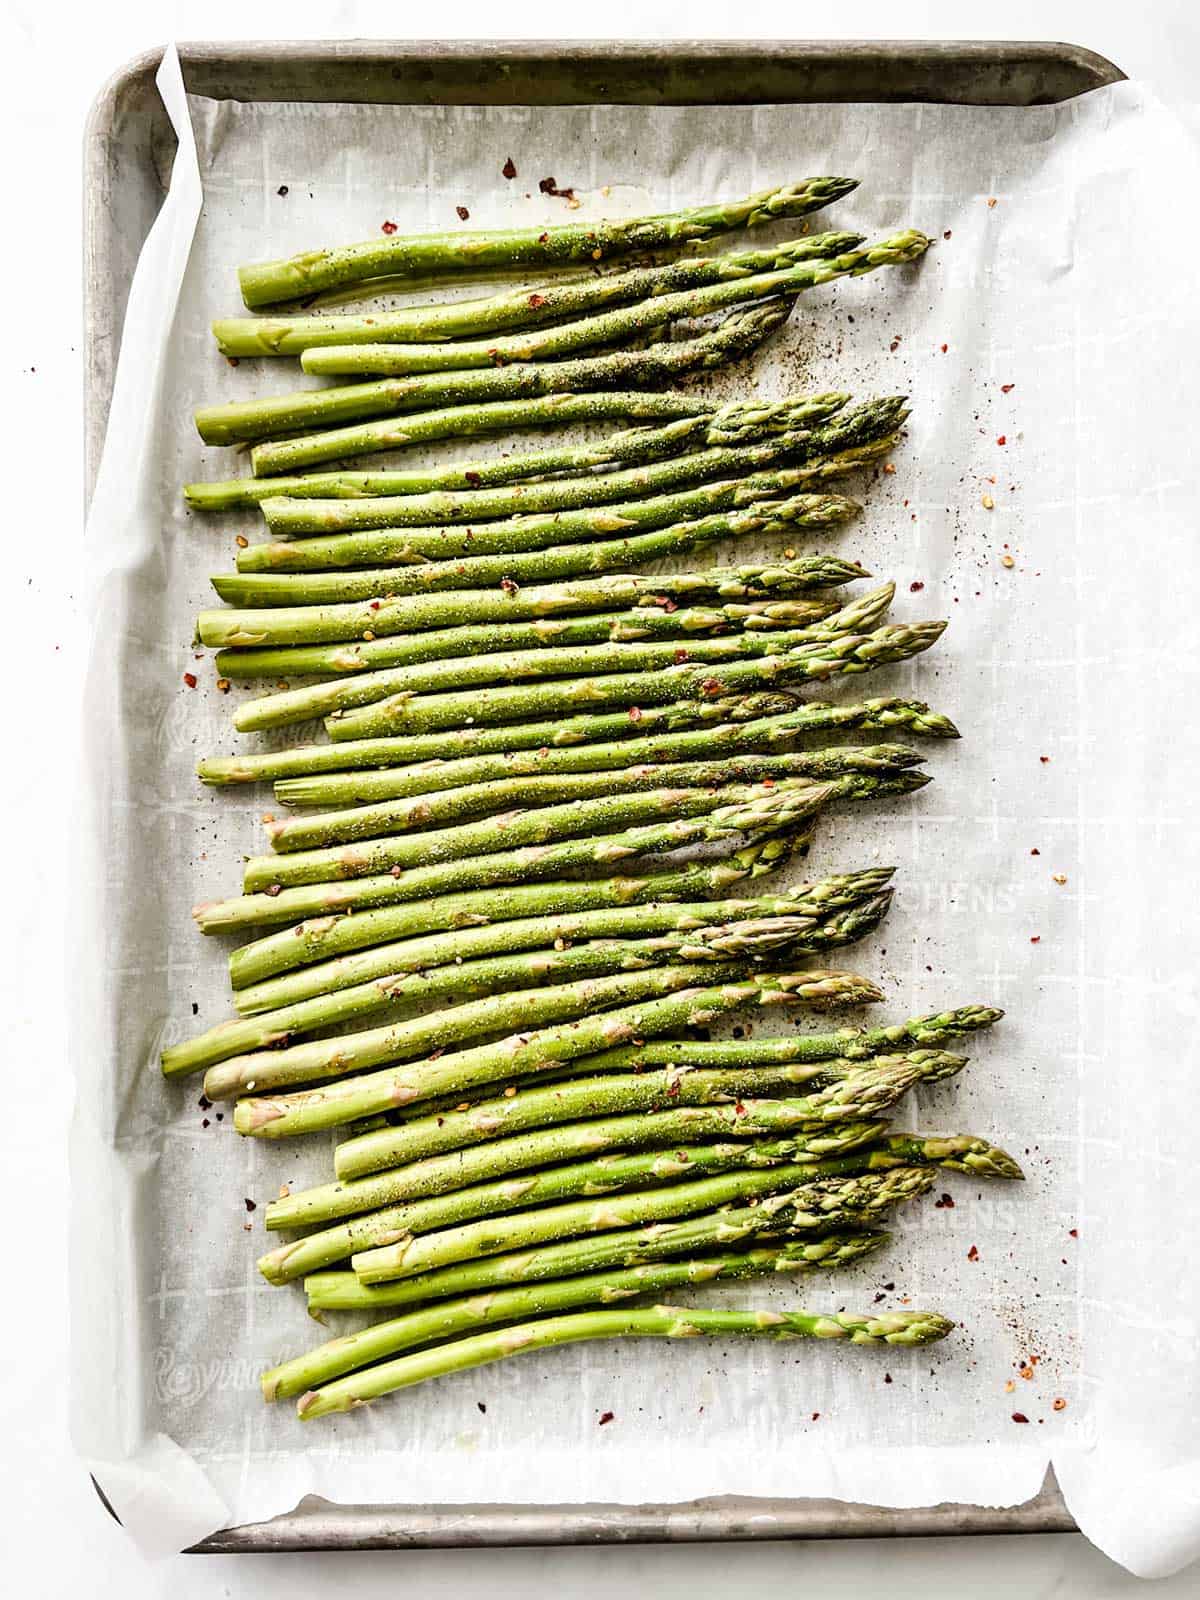 Parchment lined baking sheet with seasoned asparagus.